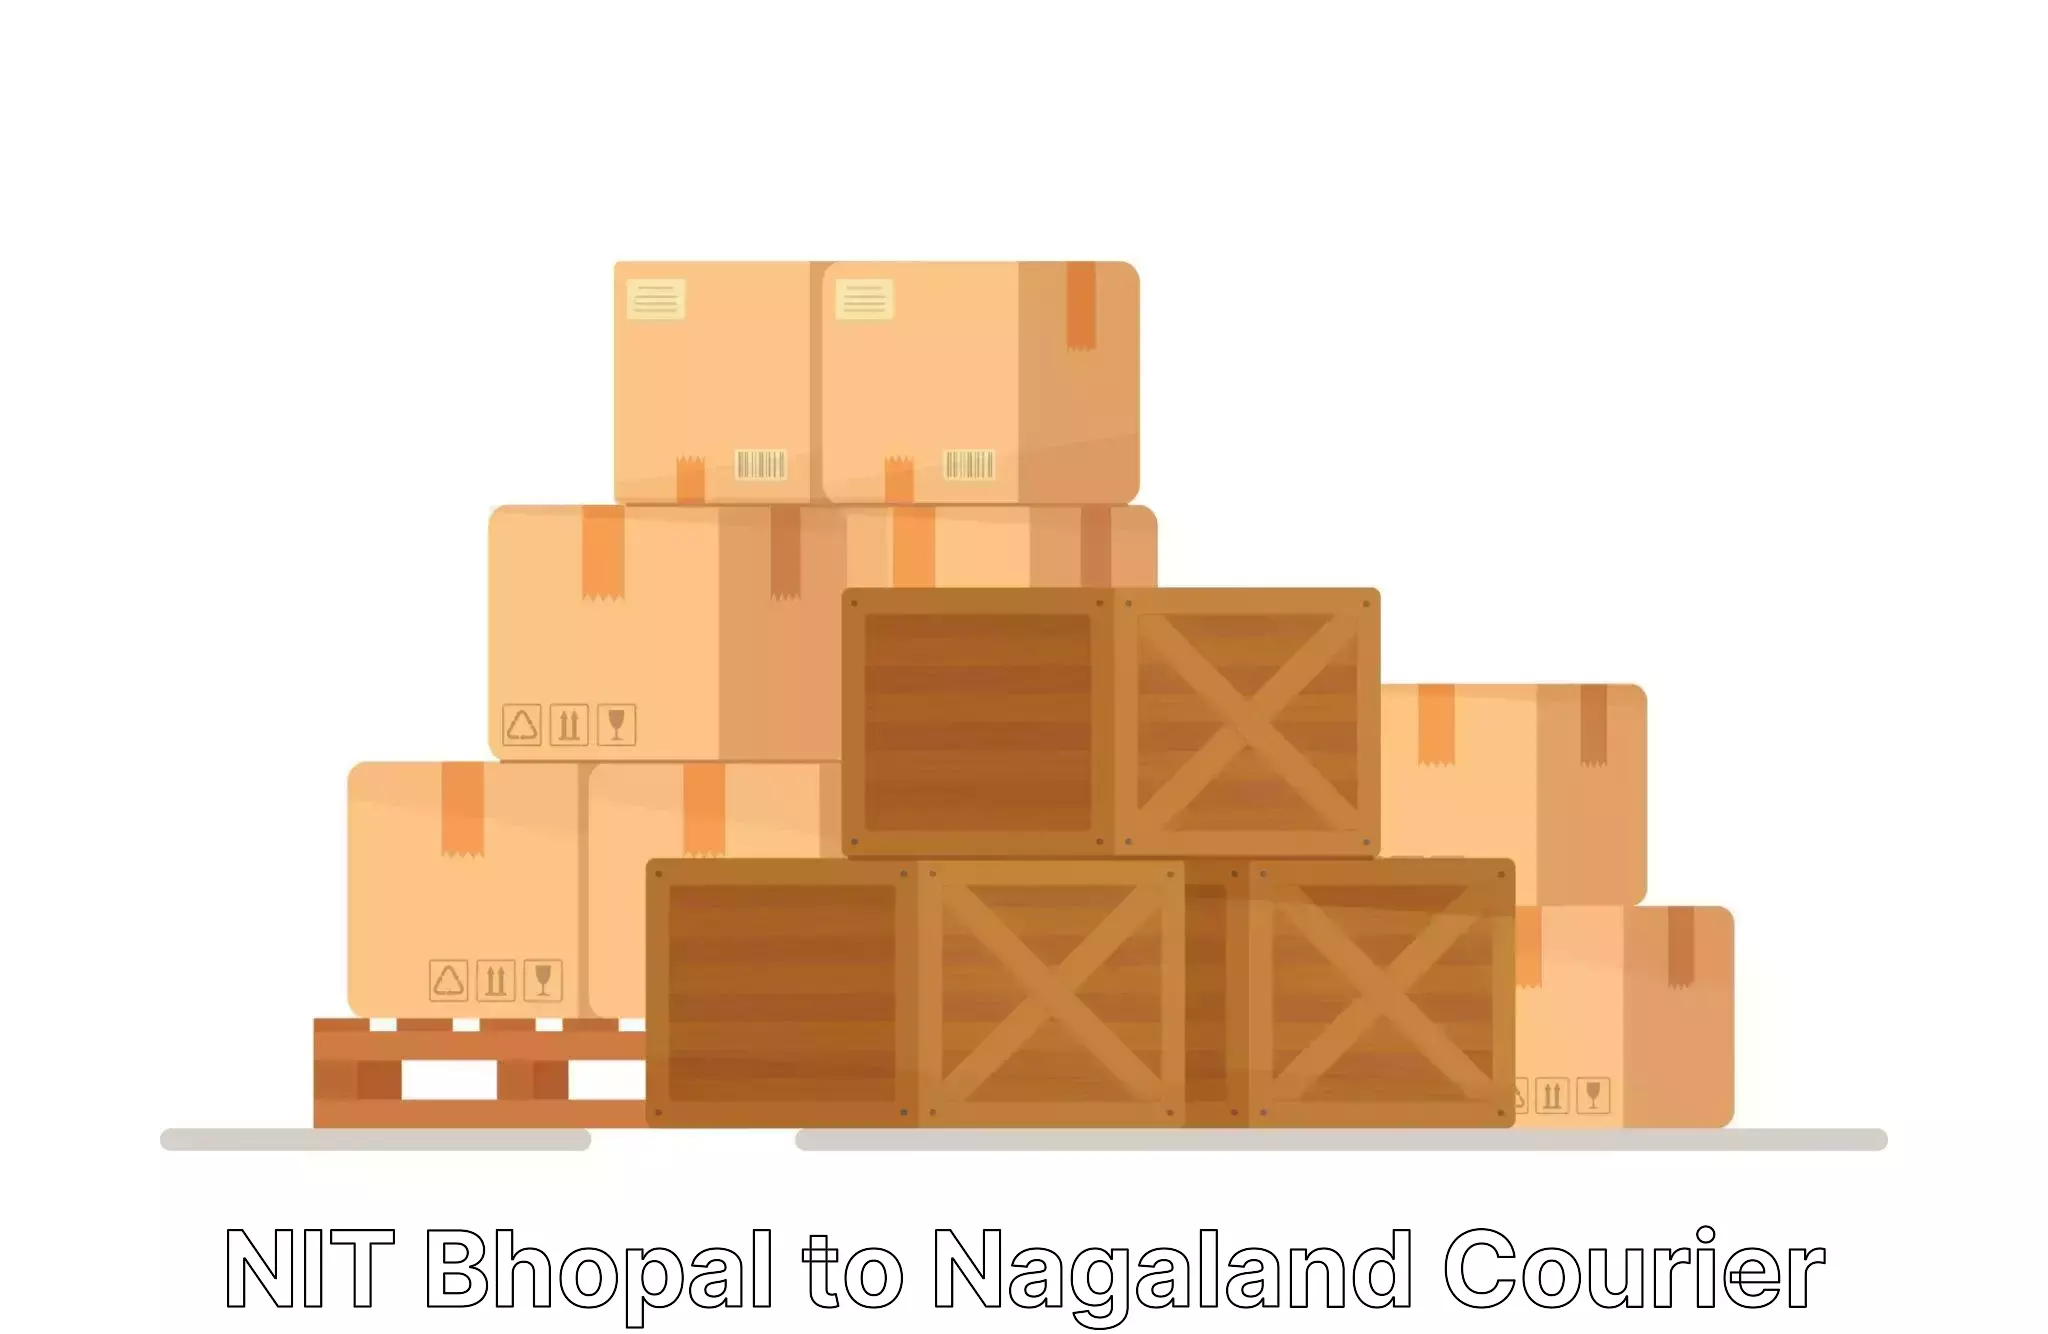 Quality relocation services NIT Bhopal to NIT Nagaland